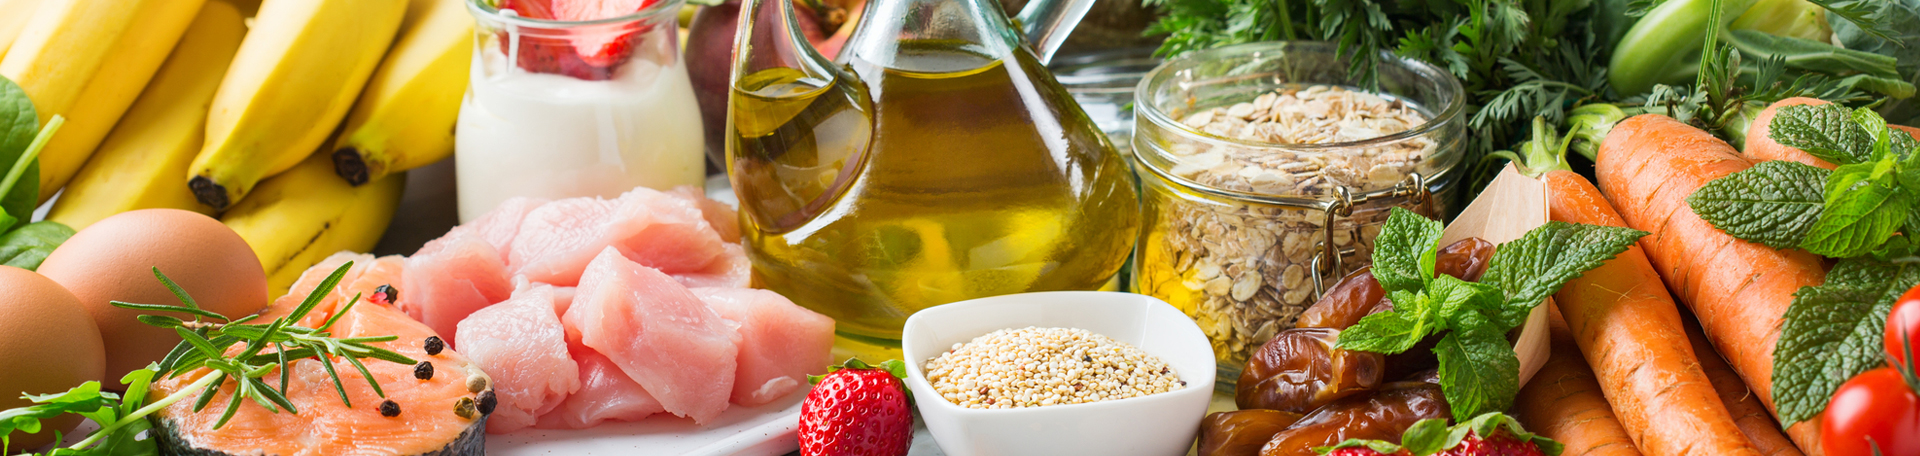 Nashua mediterranean diet good for body and mind, part of Nashua chiropractic treatment plan for some